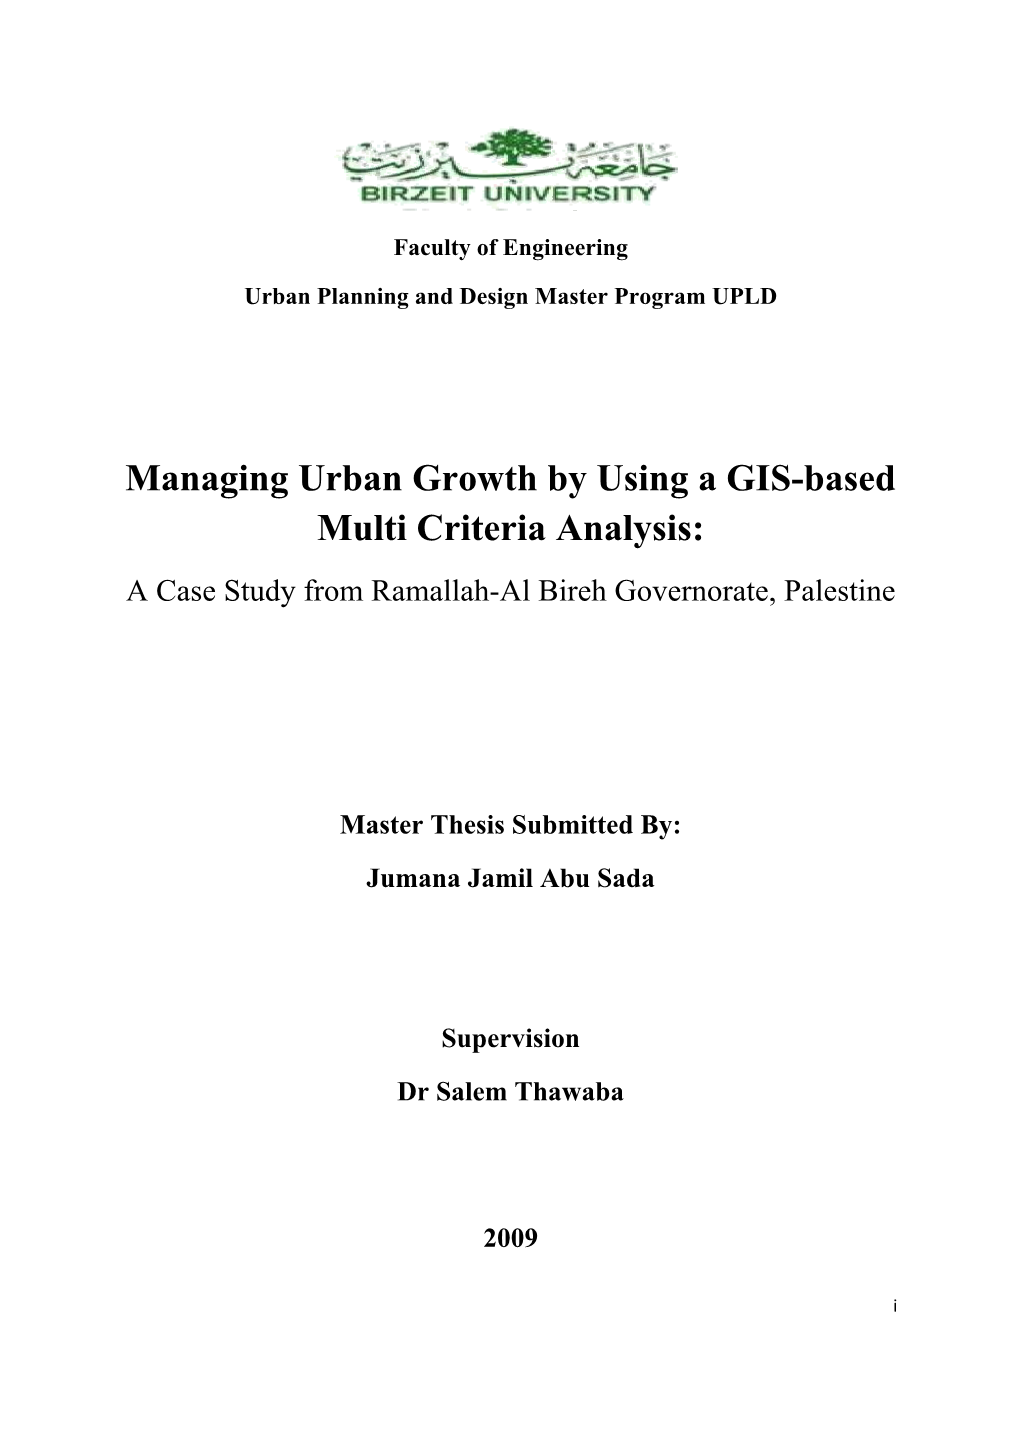 Managing Urban Growth by Using a GIS-Based Multi Criteria Analysis: a Case Study from Ramallah-Al Bireh Governorate, Palestine